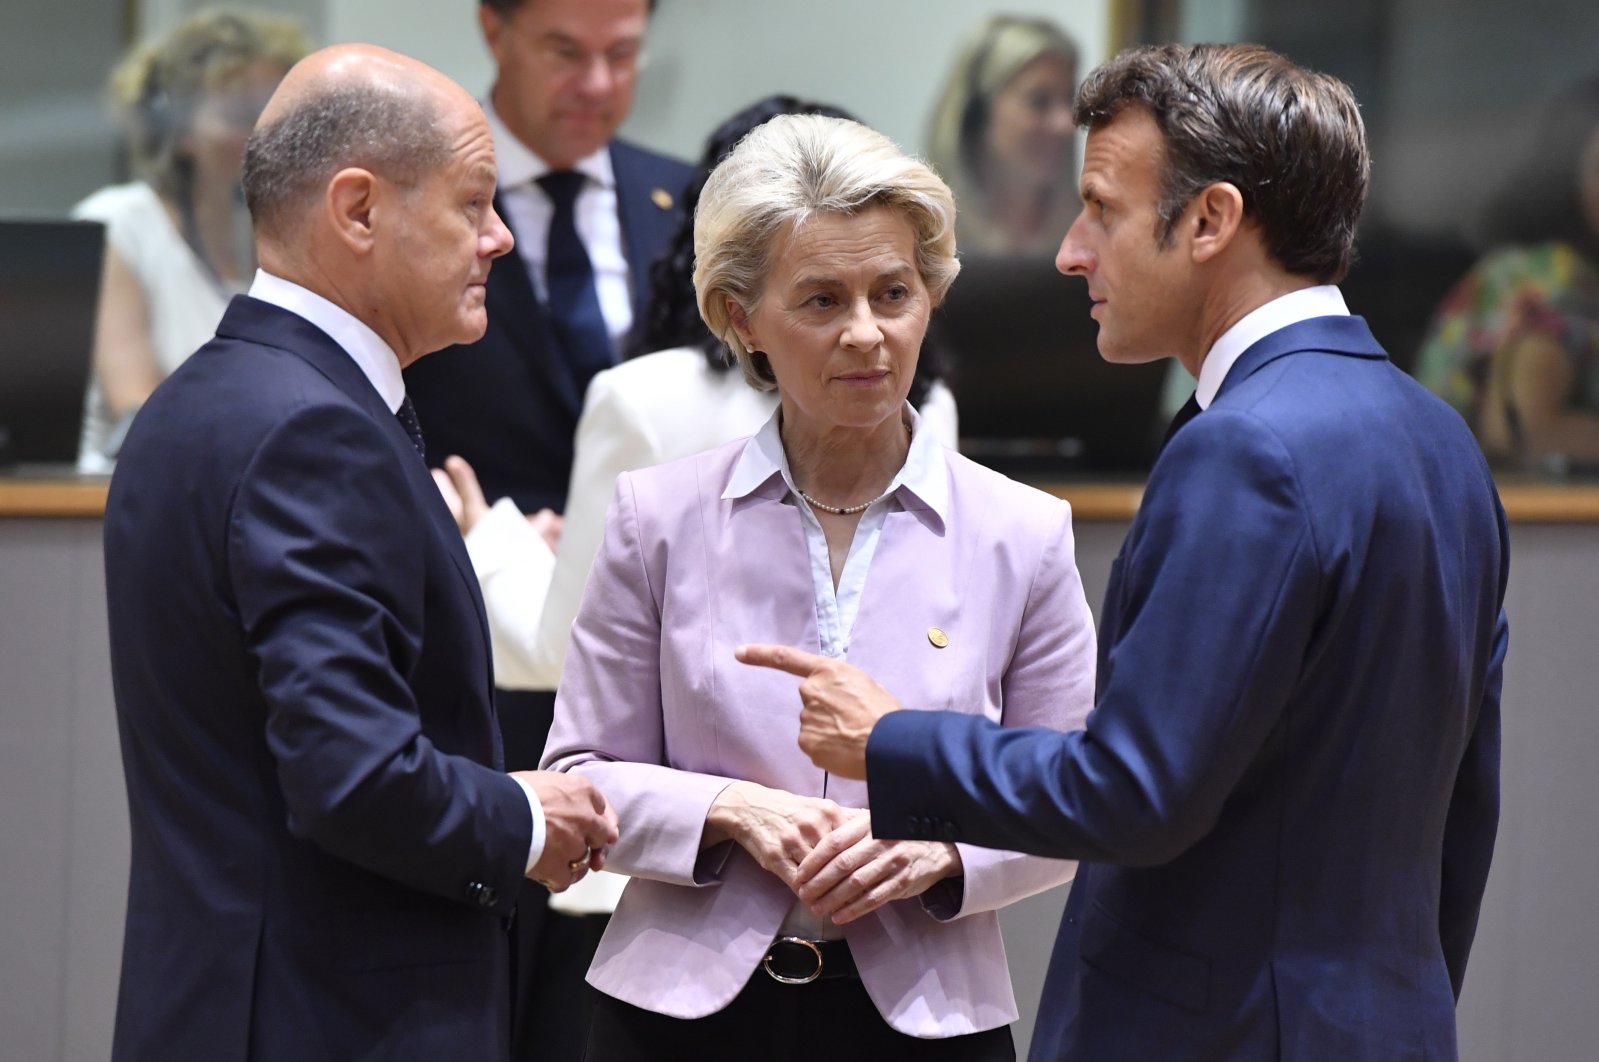 German Chancellor Olaf Scholz (L), speaks with European Commission President Ursula von der Leyen (C), and French President Emmanuel Macron during a round table meeting at an EU summit in Brussels, Belgium, June 23, 2022. (AP Photo)